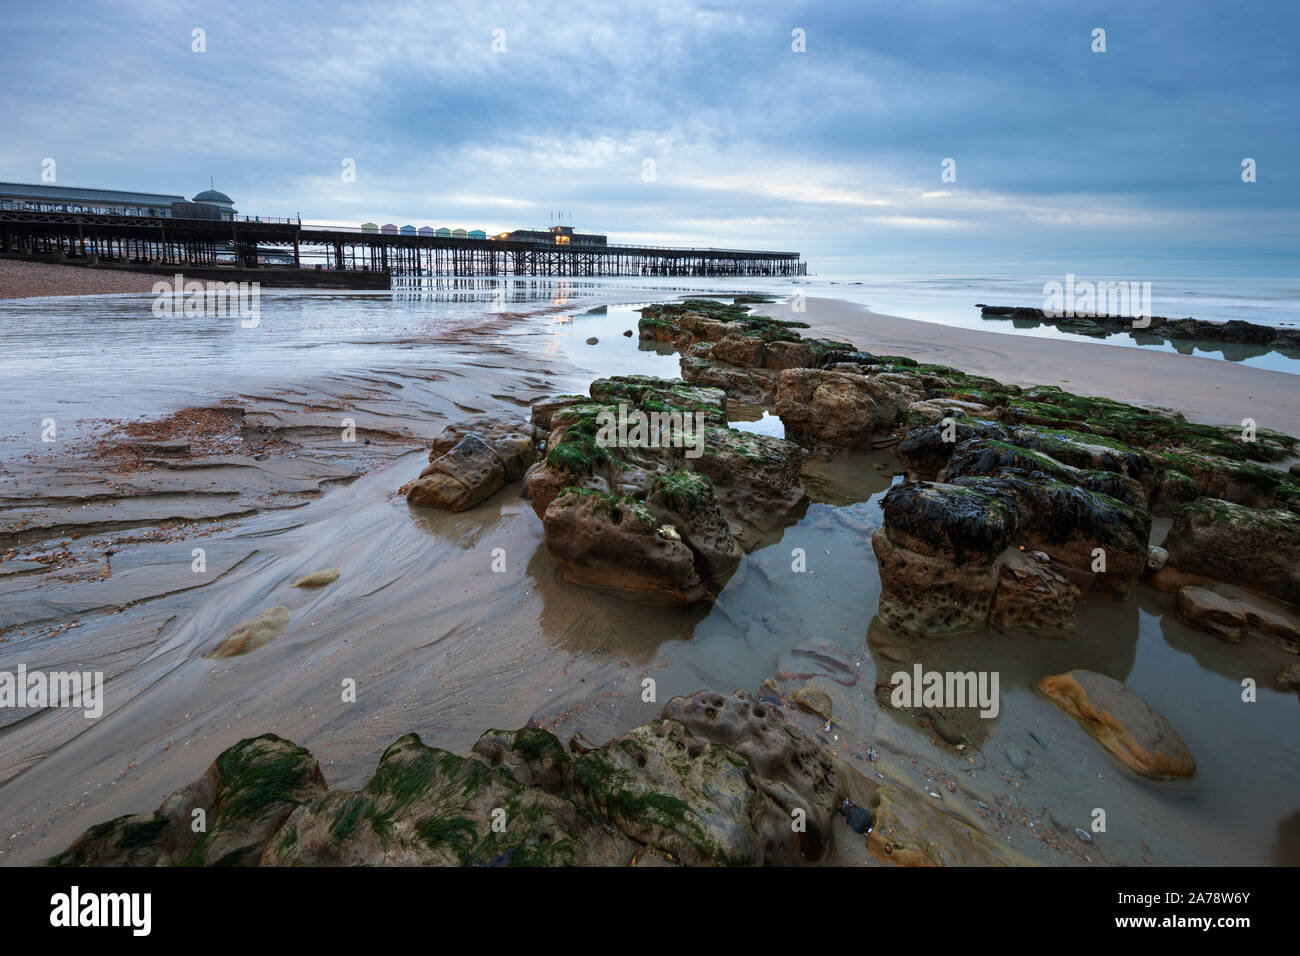 Hastings Pier with rocks on beach at low tide at dawn, Hastings, East Sussex, England, United Kingdom, Europe Stock Photo